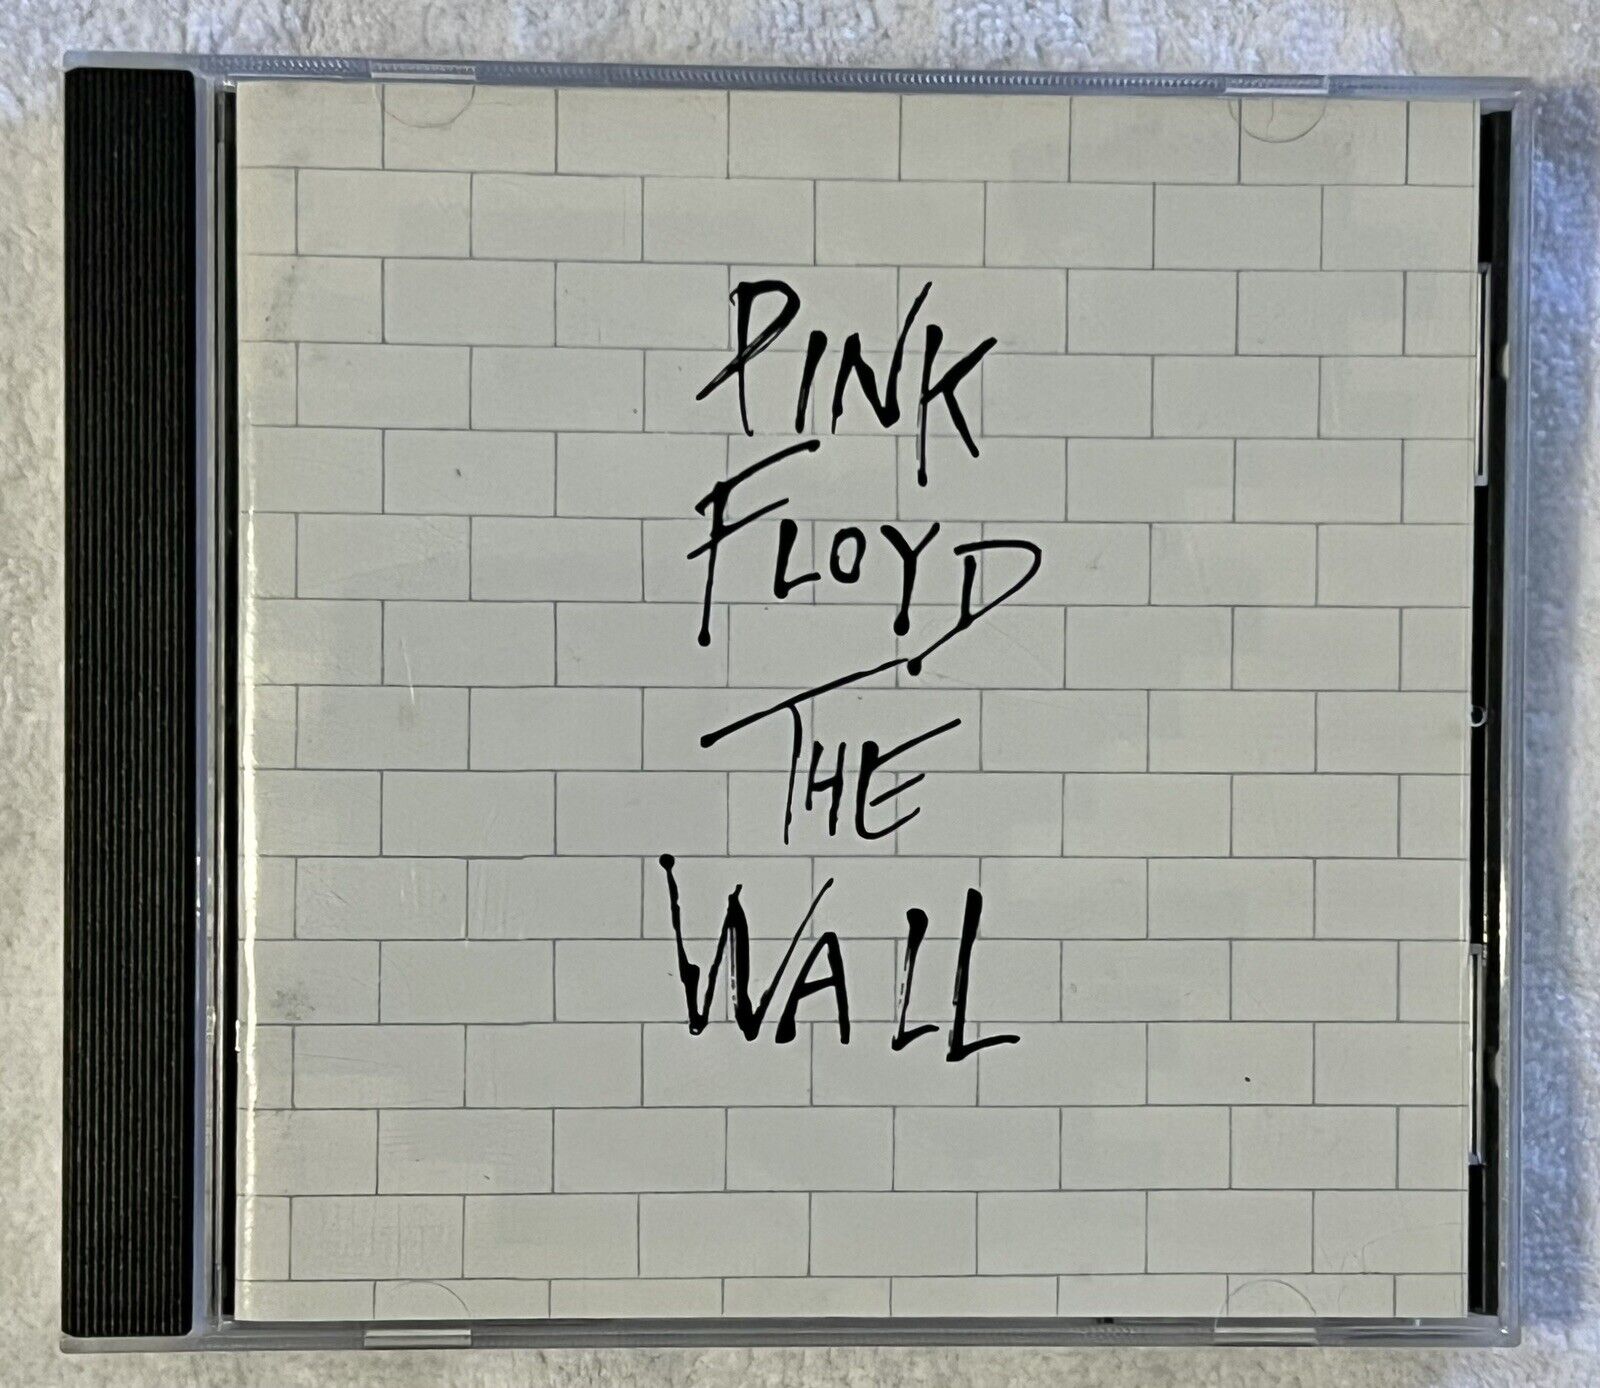 The Wall by Pink Floyd (CD, Dec-1997, 2 Discs, Columbia Preowned VGC